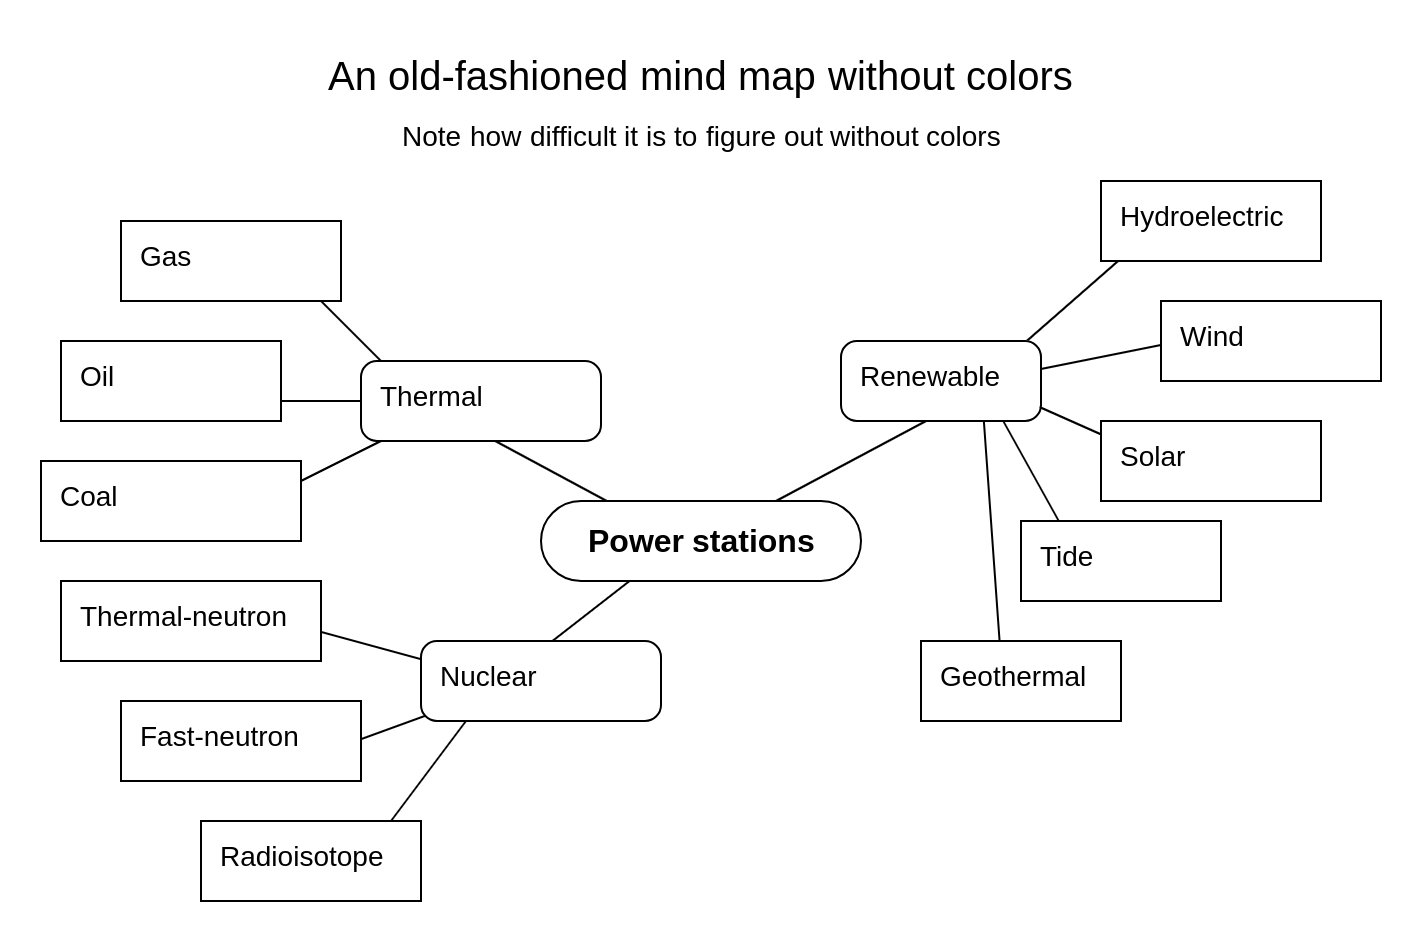 A traditional mind map without colors